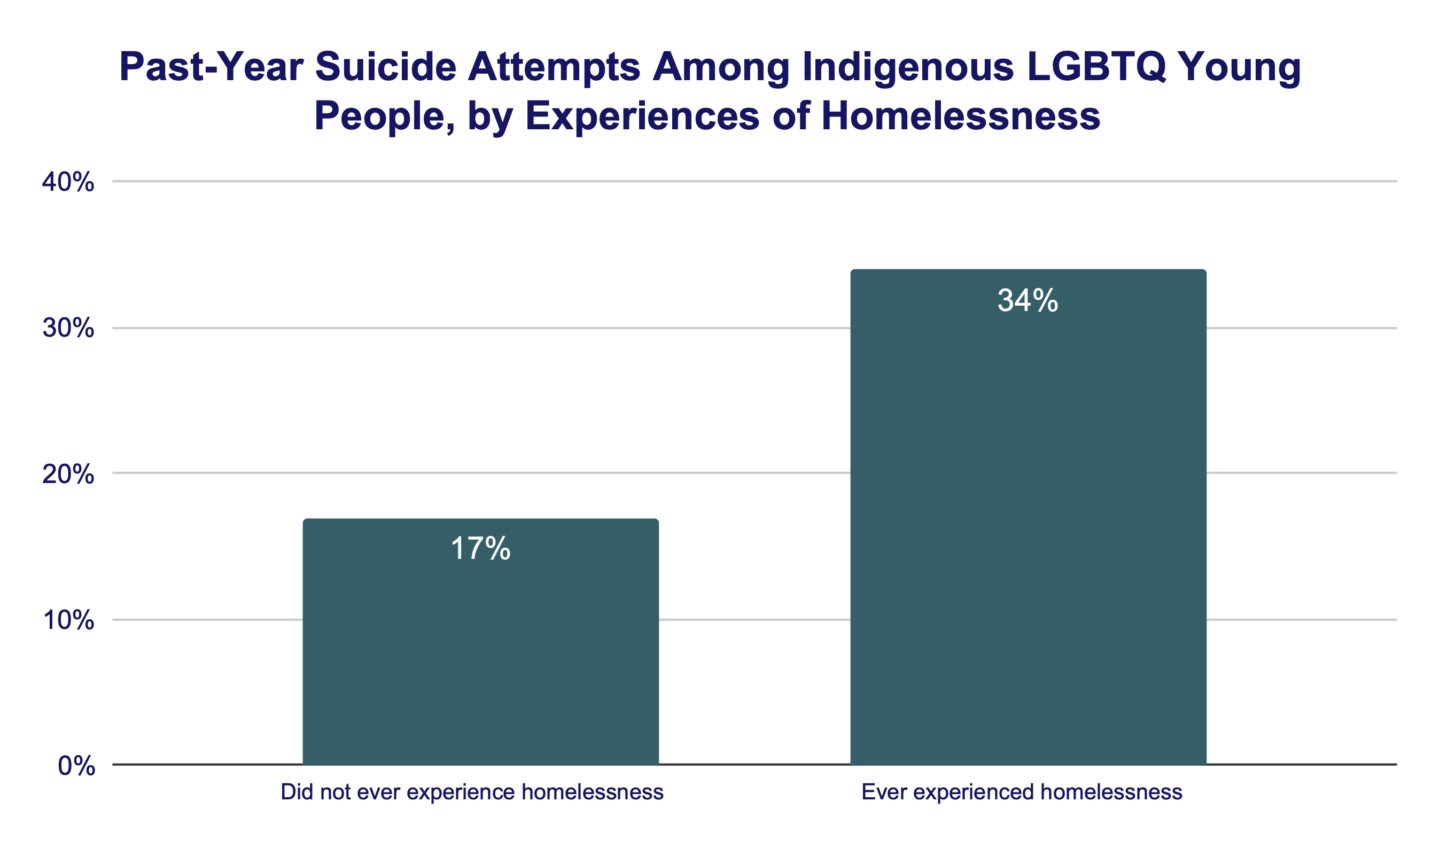 Past Year Suicide Attempts Among Indigenous LGBTQ Young People by Experiences of Homelessness